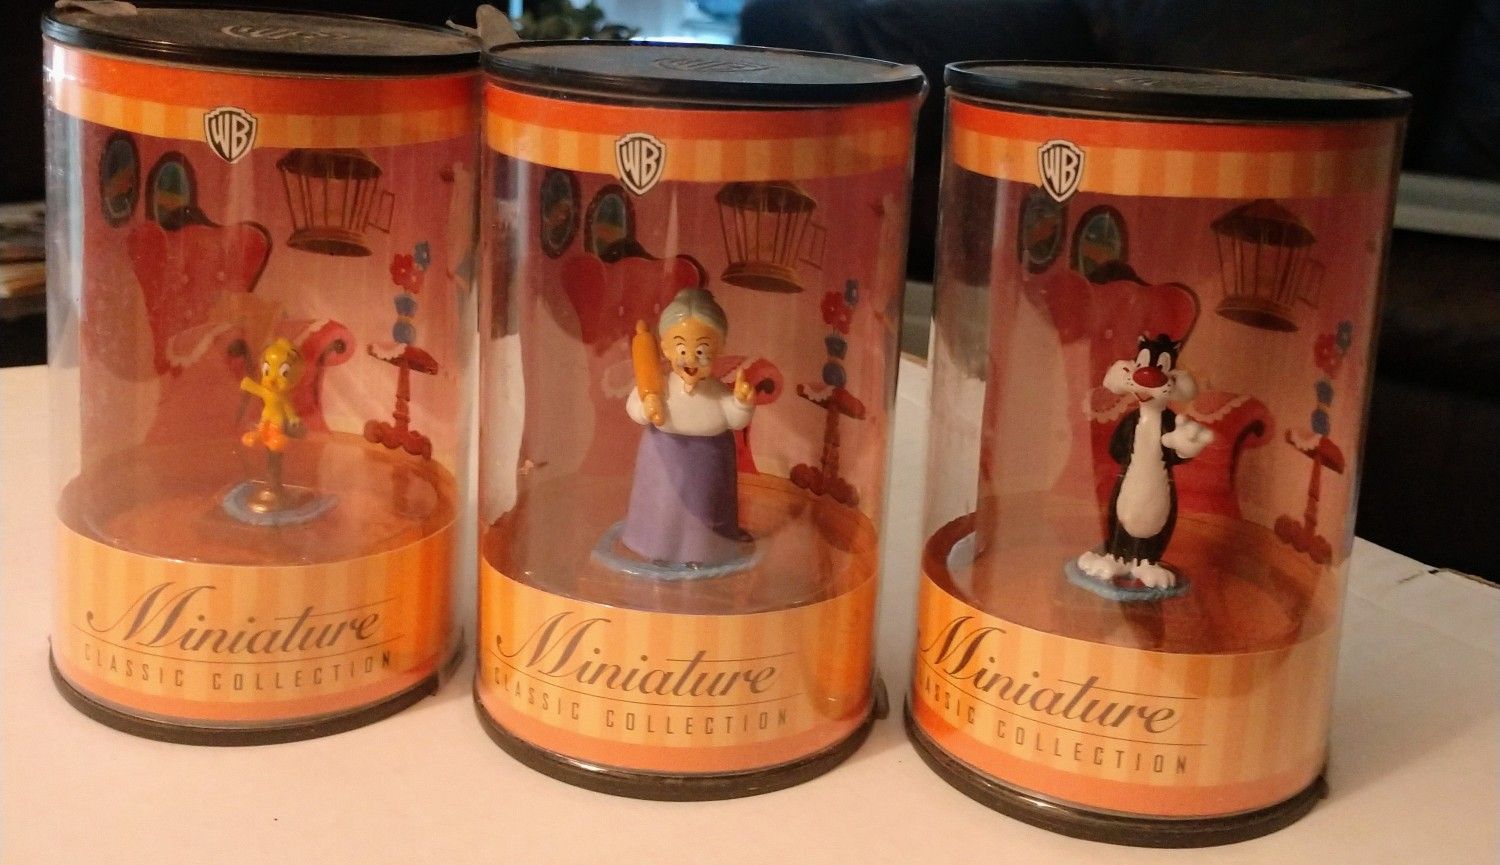 Warner Bros Classic Miniature Collection 